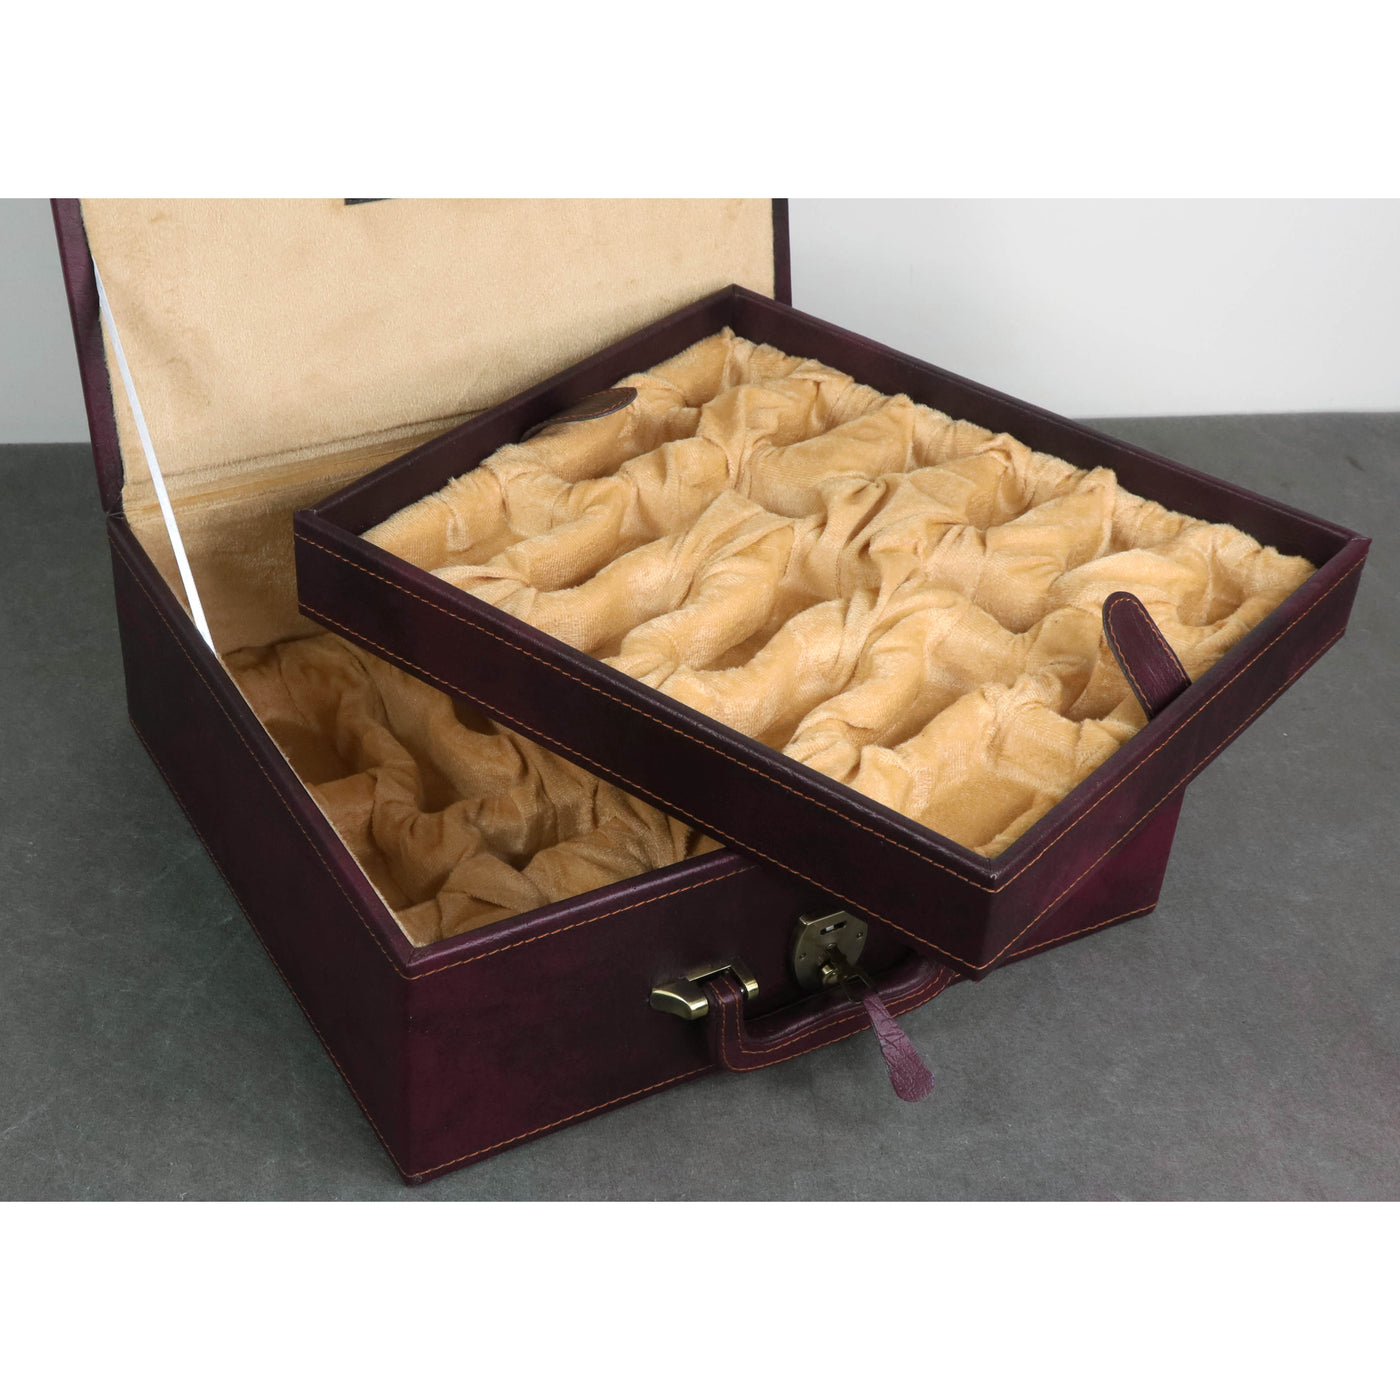 Deluxe Burgundy Leatherette Coffer Storage Box for Chess Pieces 